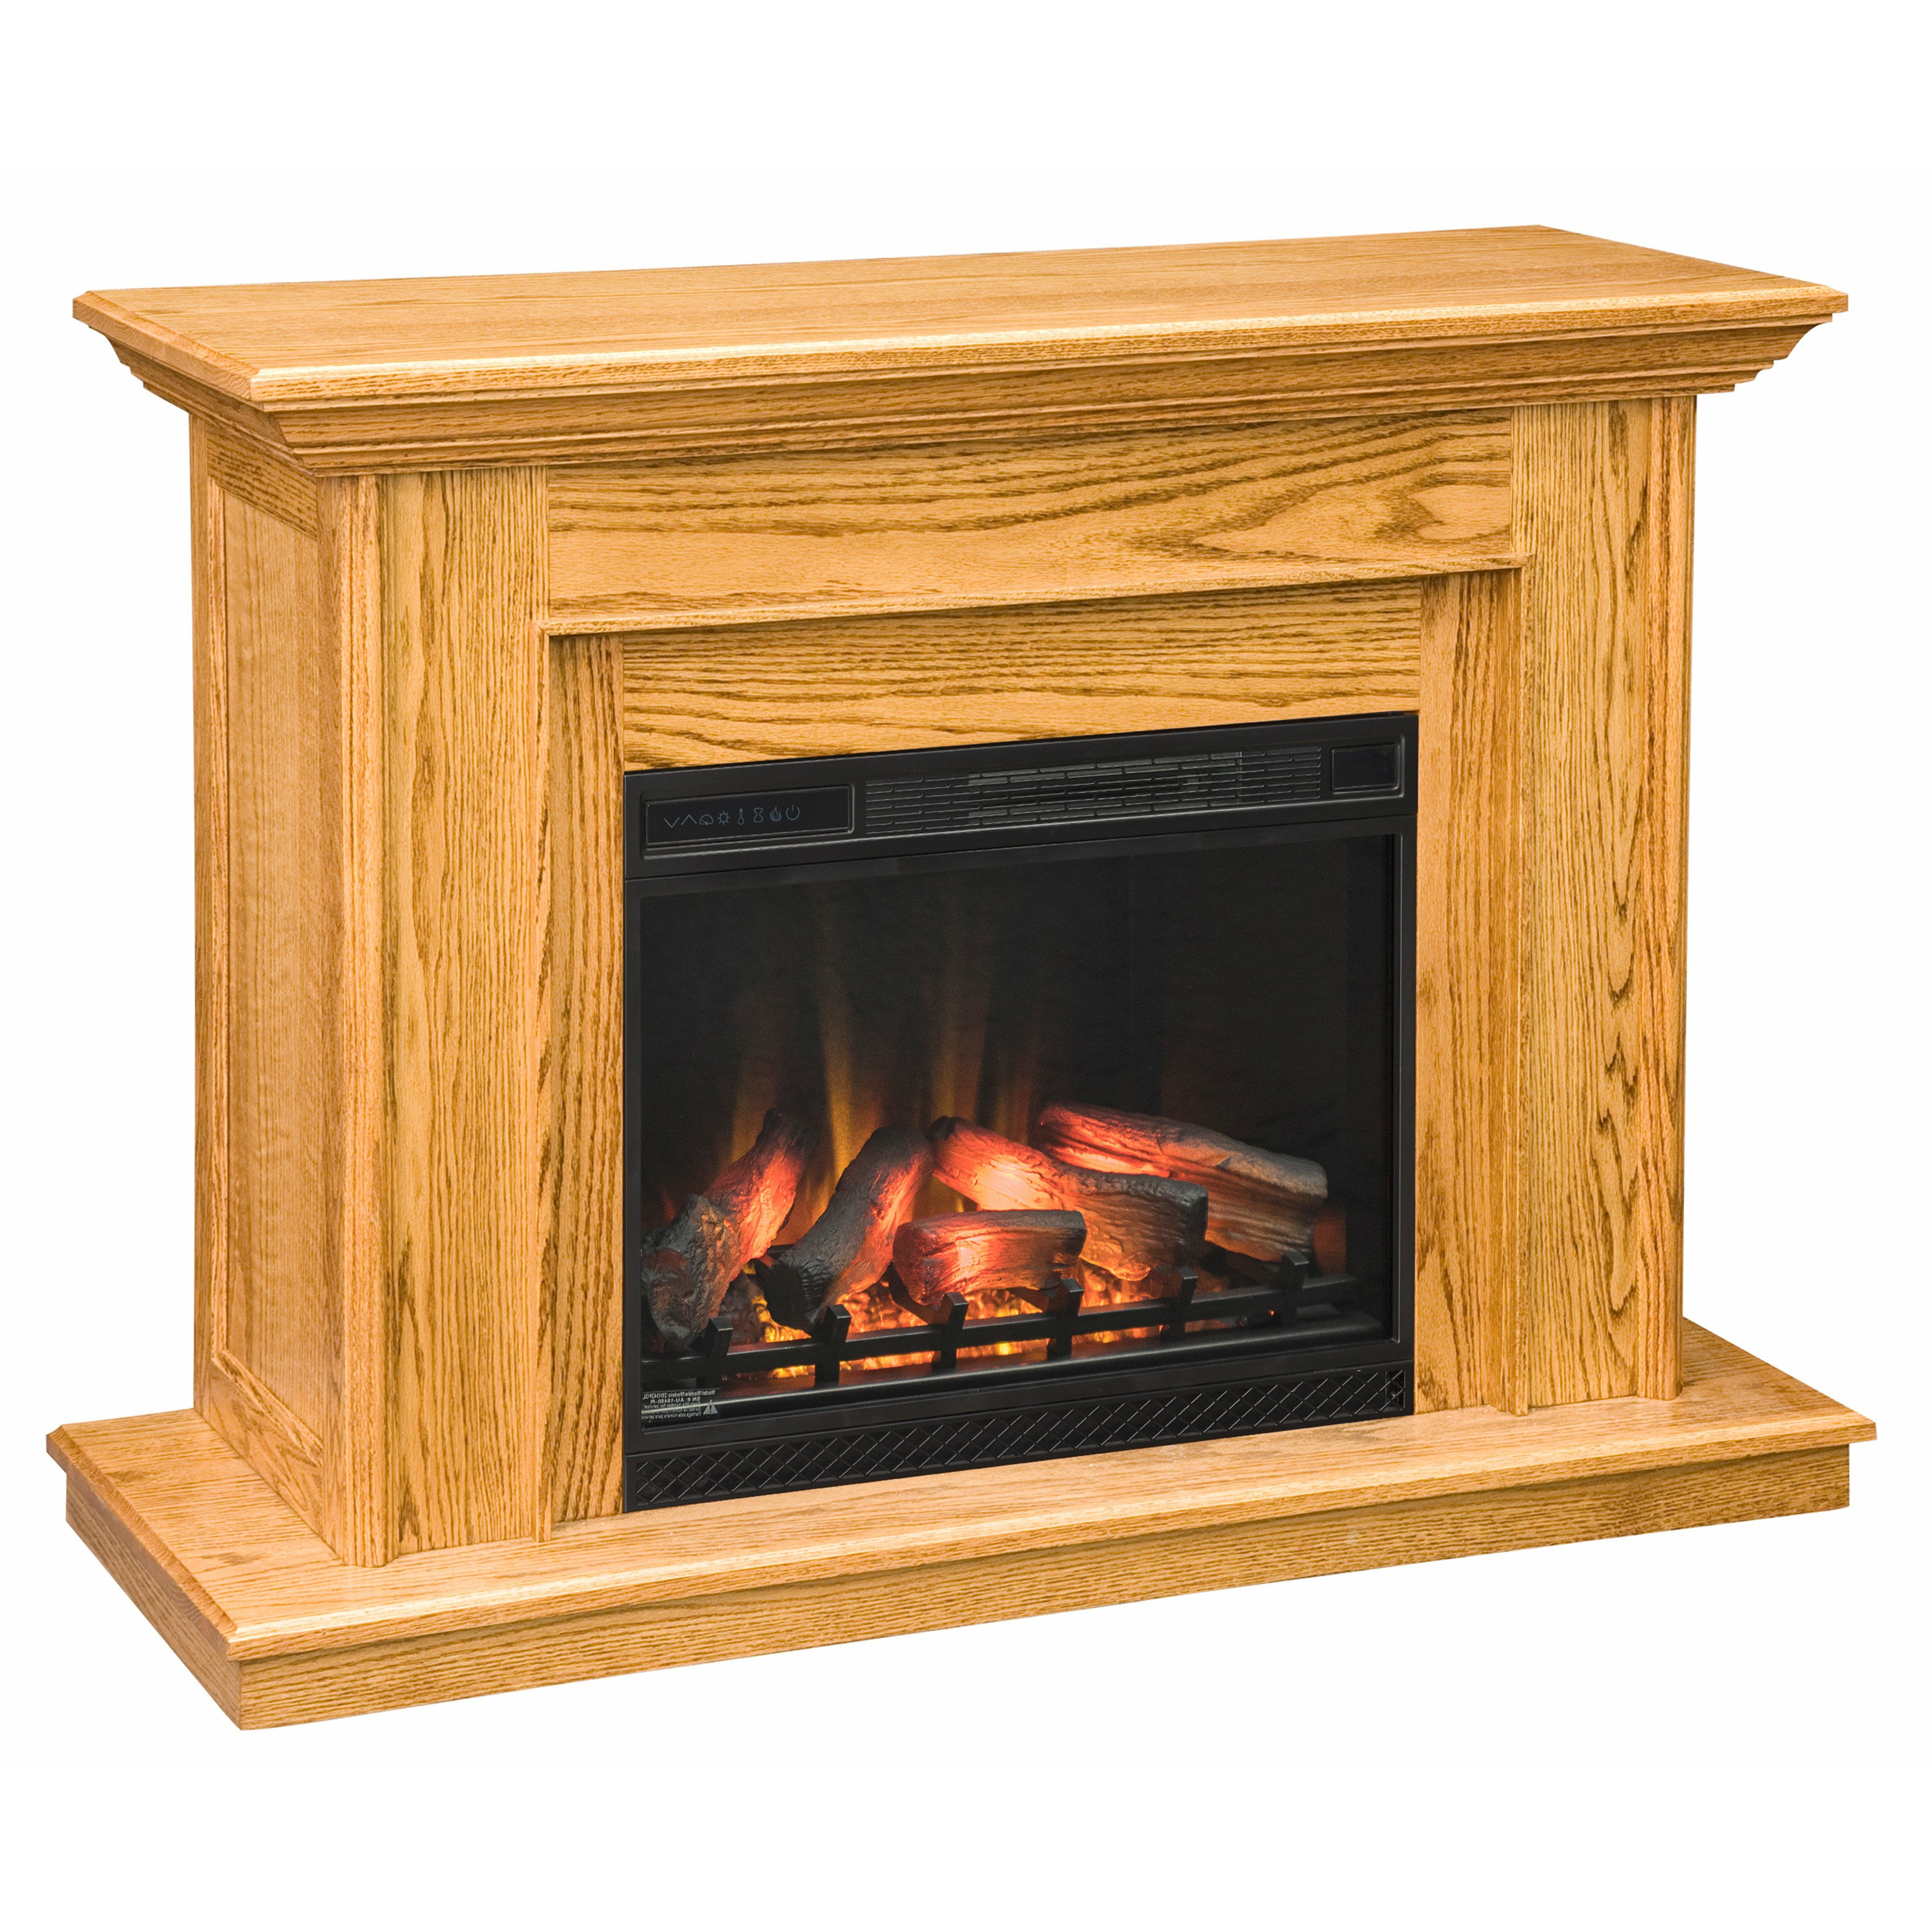 QW Amish Valley Fireplace – Quality Woods Furniture